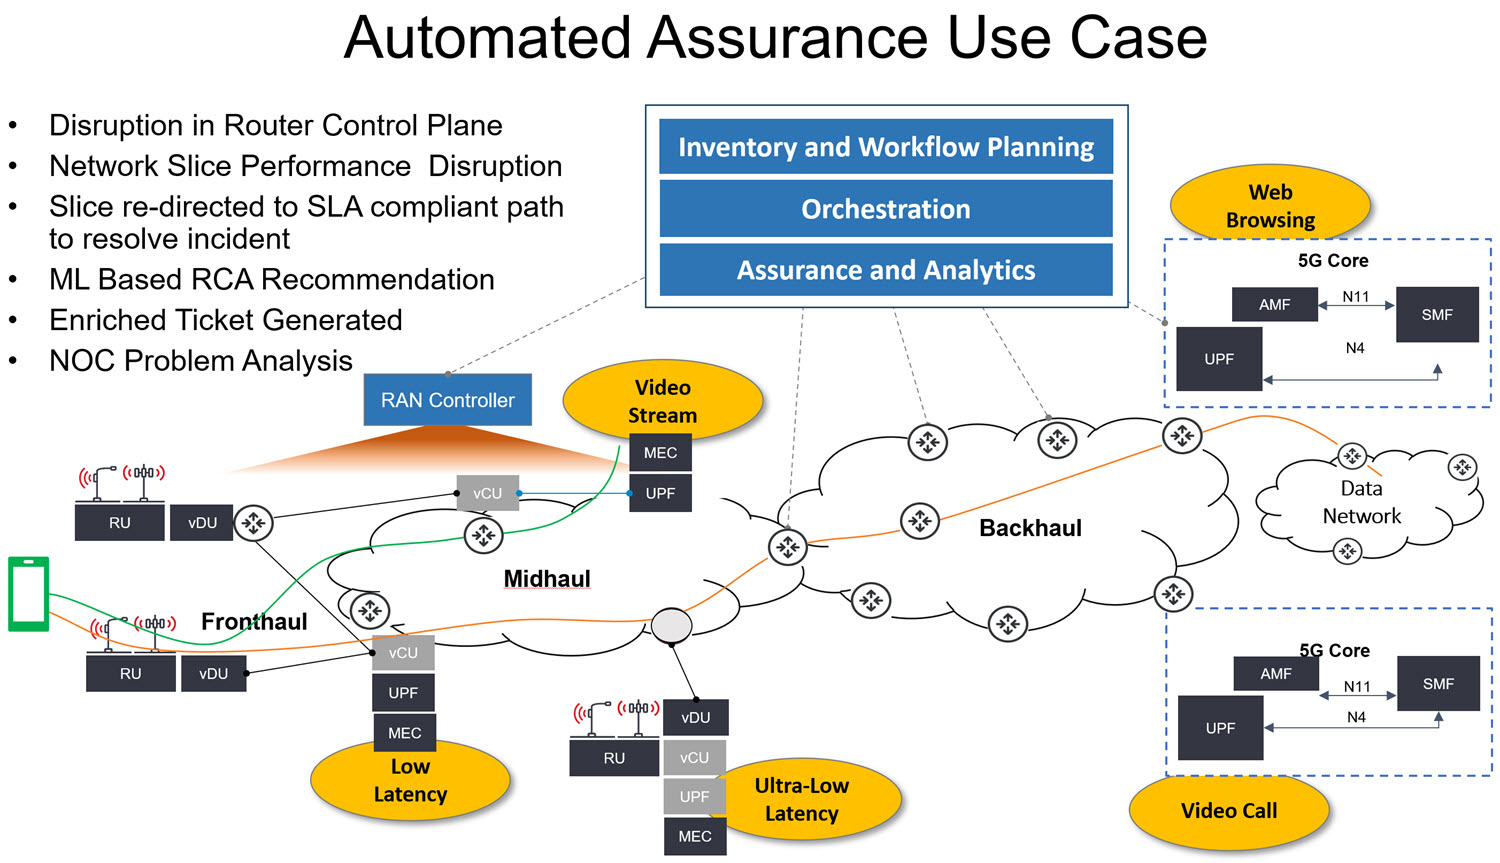 Automated Assurance Use Case Diagram